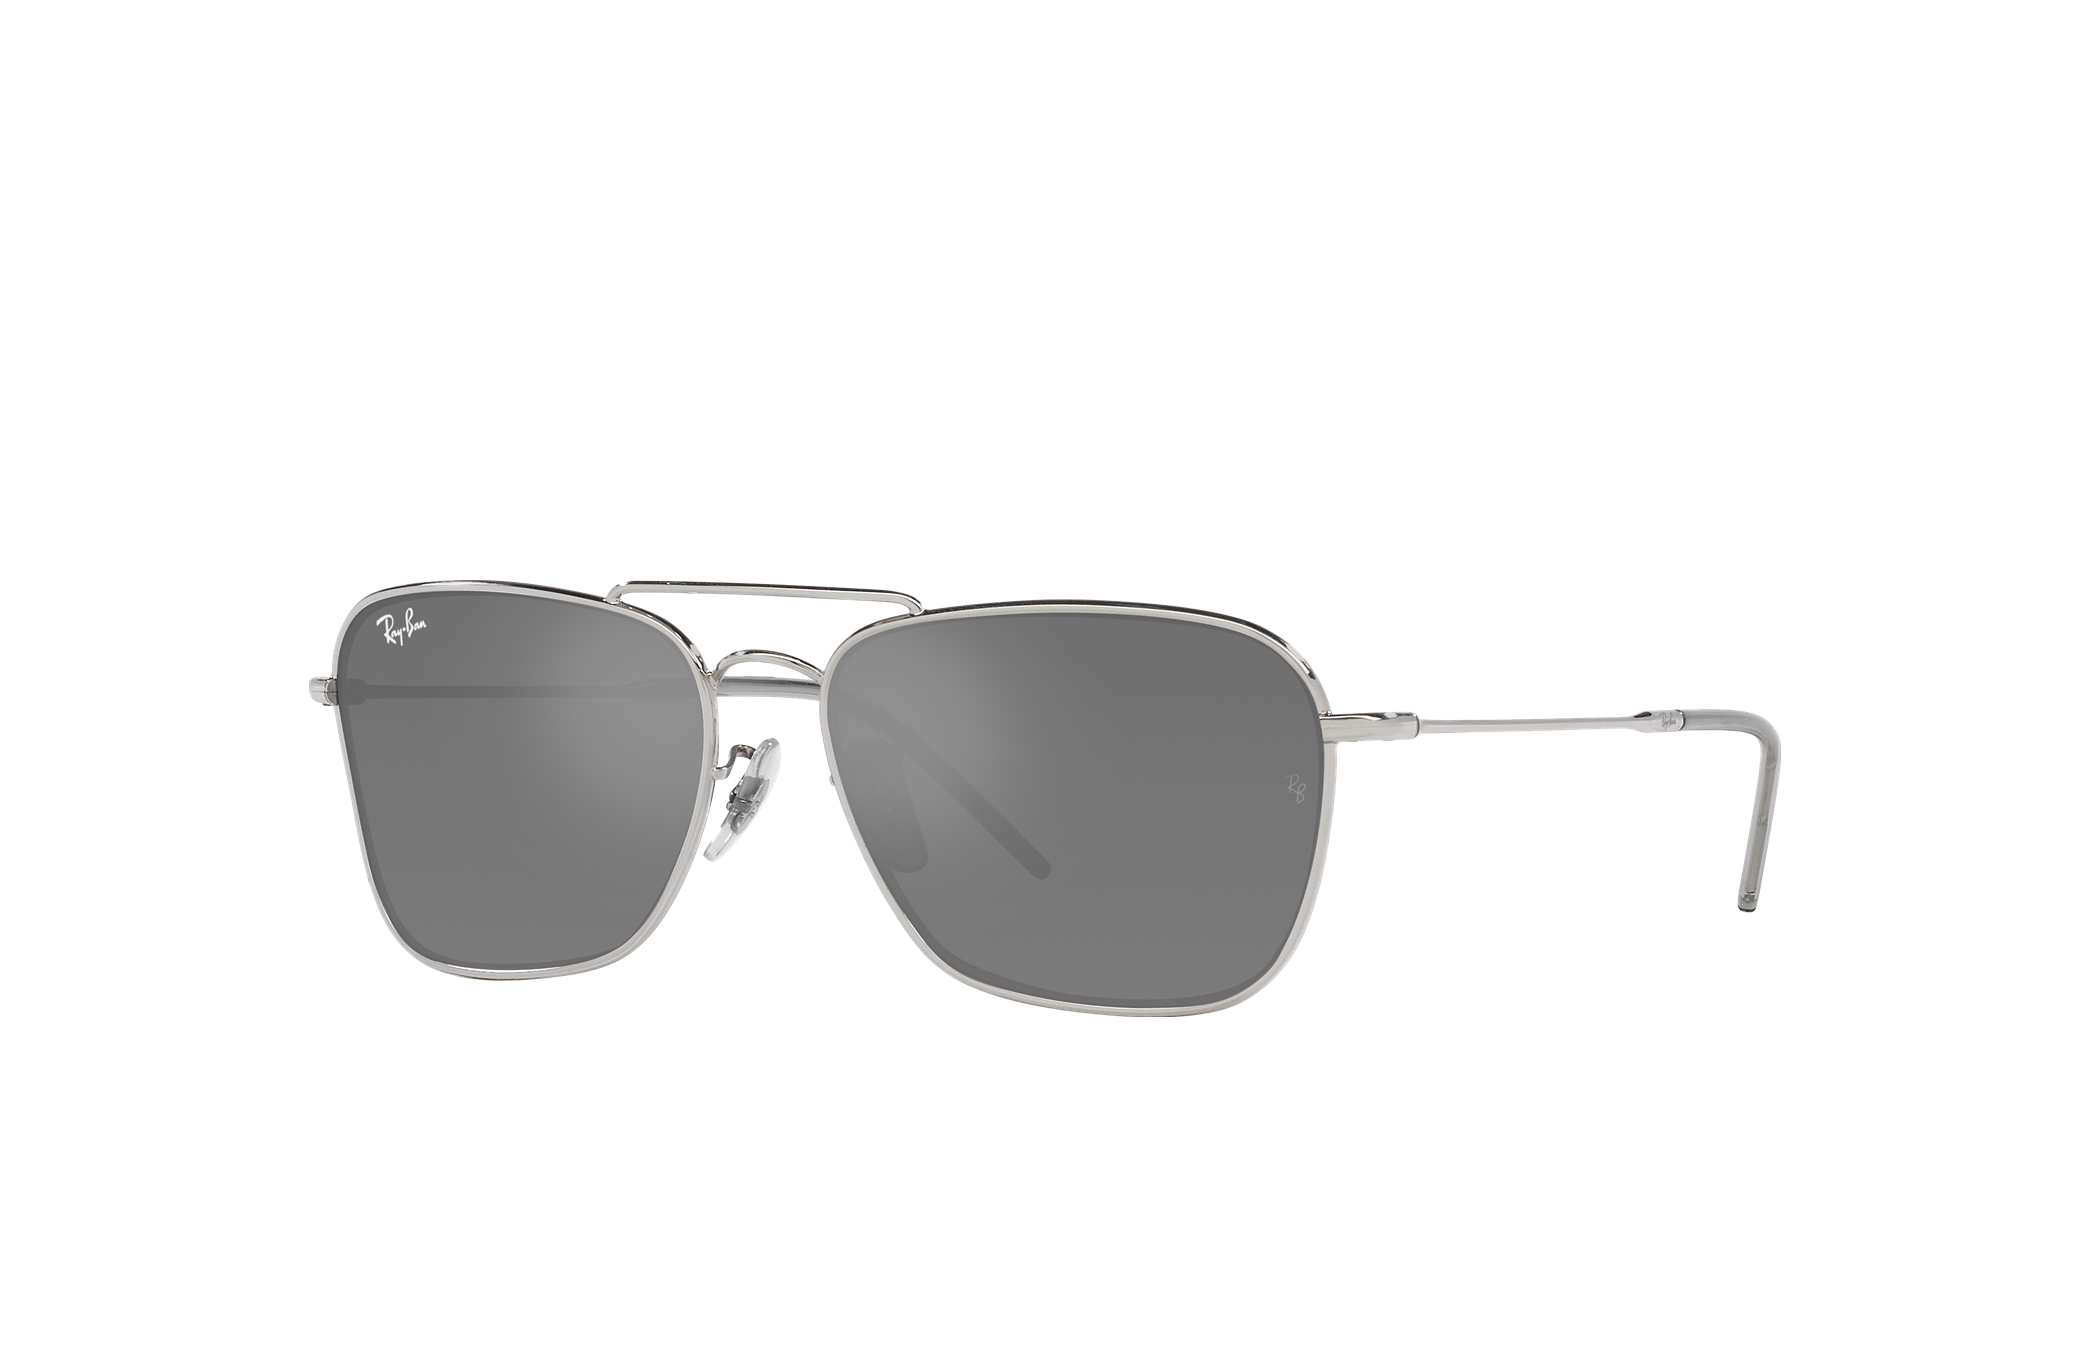 Caravan Reverse Sunglasses in Silver and Silver - RBR0102S | Ray-Ban® EU